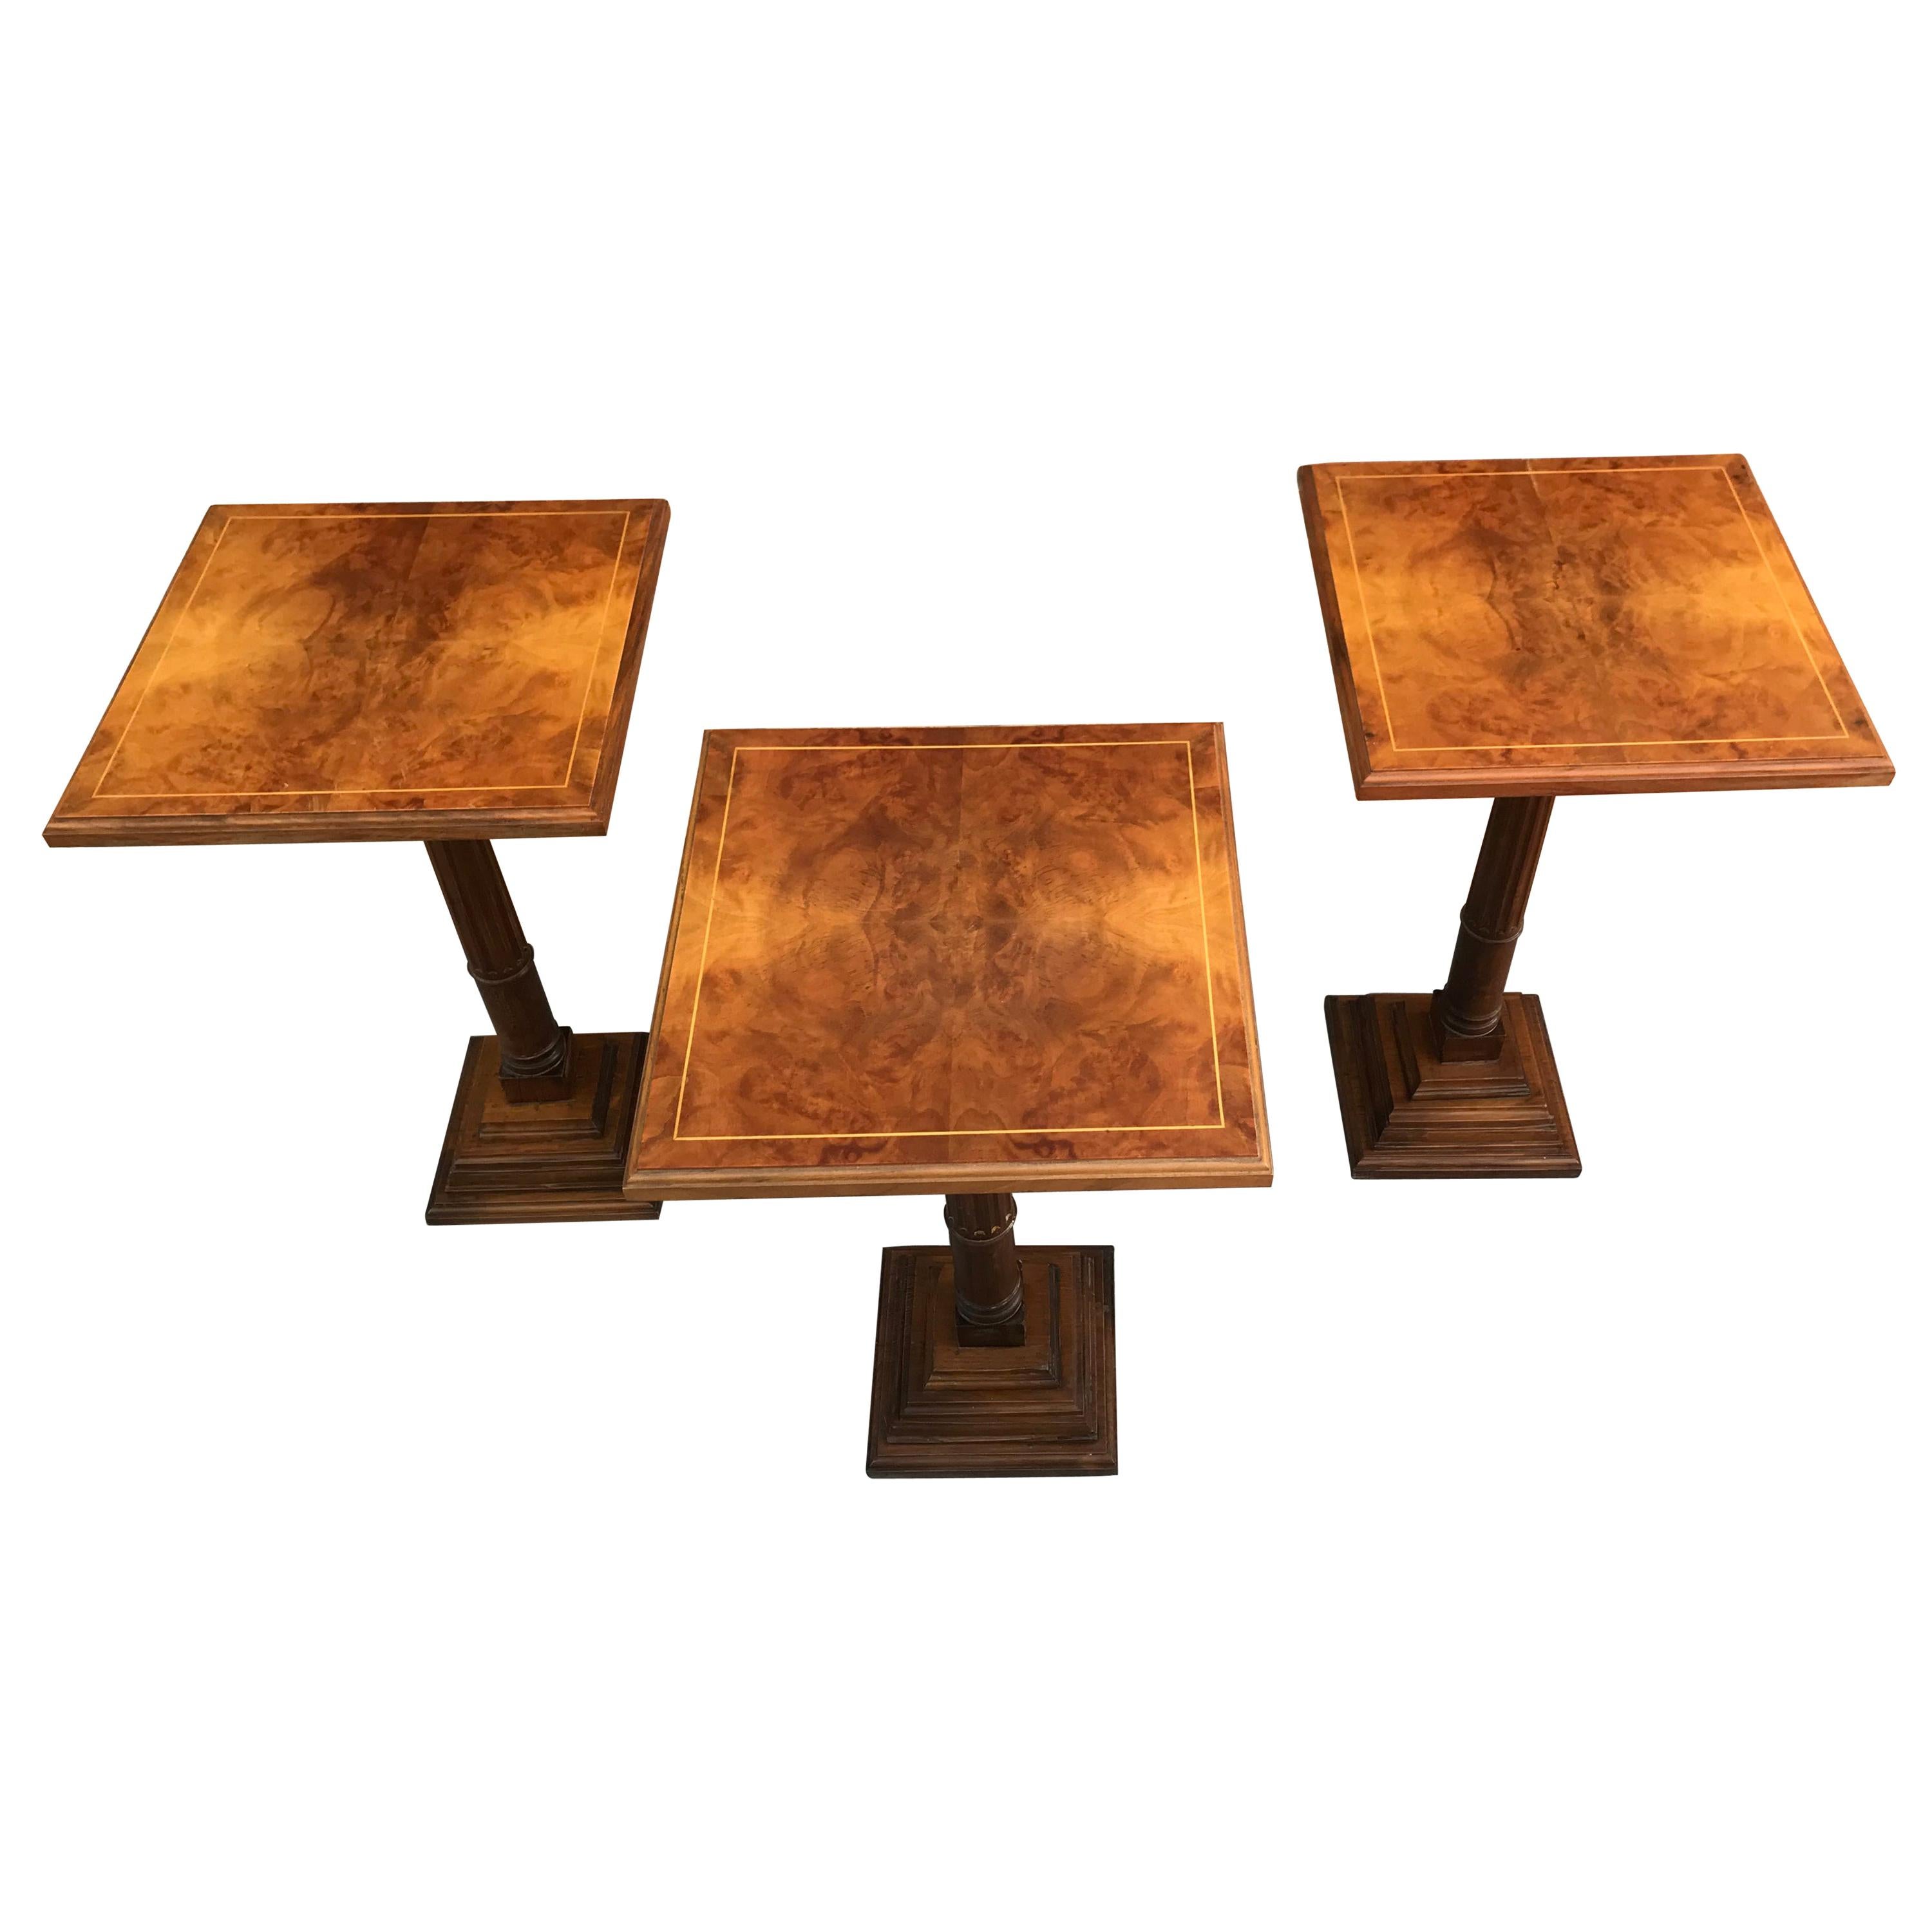 Mid-20th Century Set of Three Walnut Wood Square Top Pedestal Tables For Sale